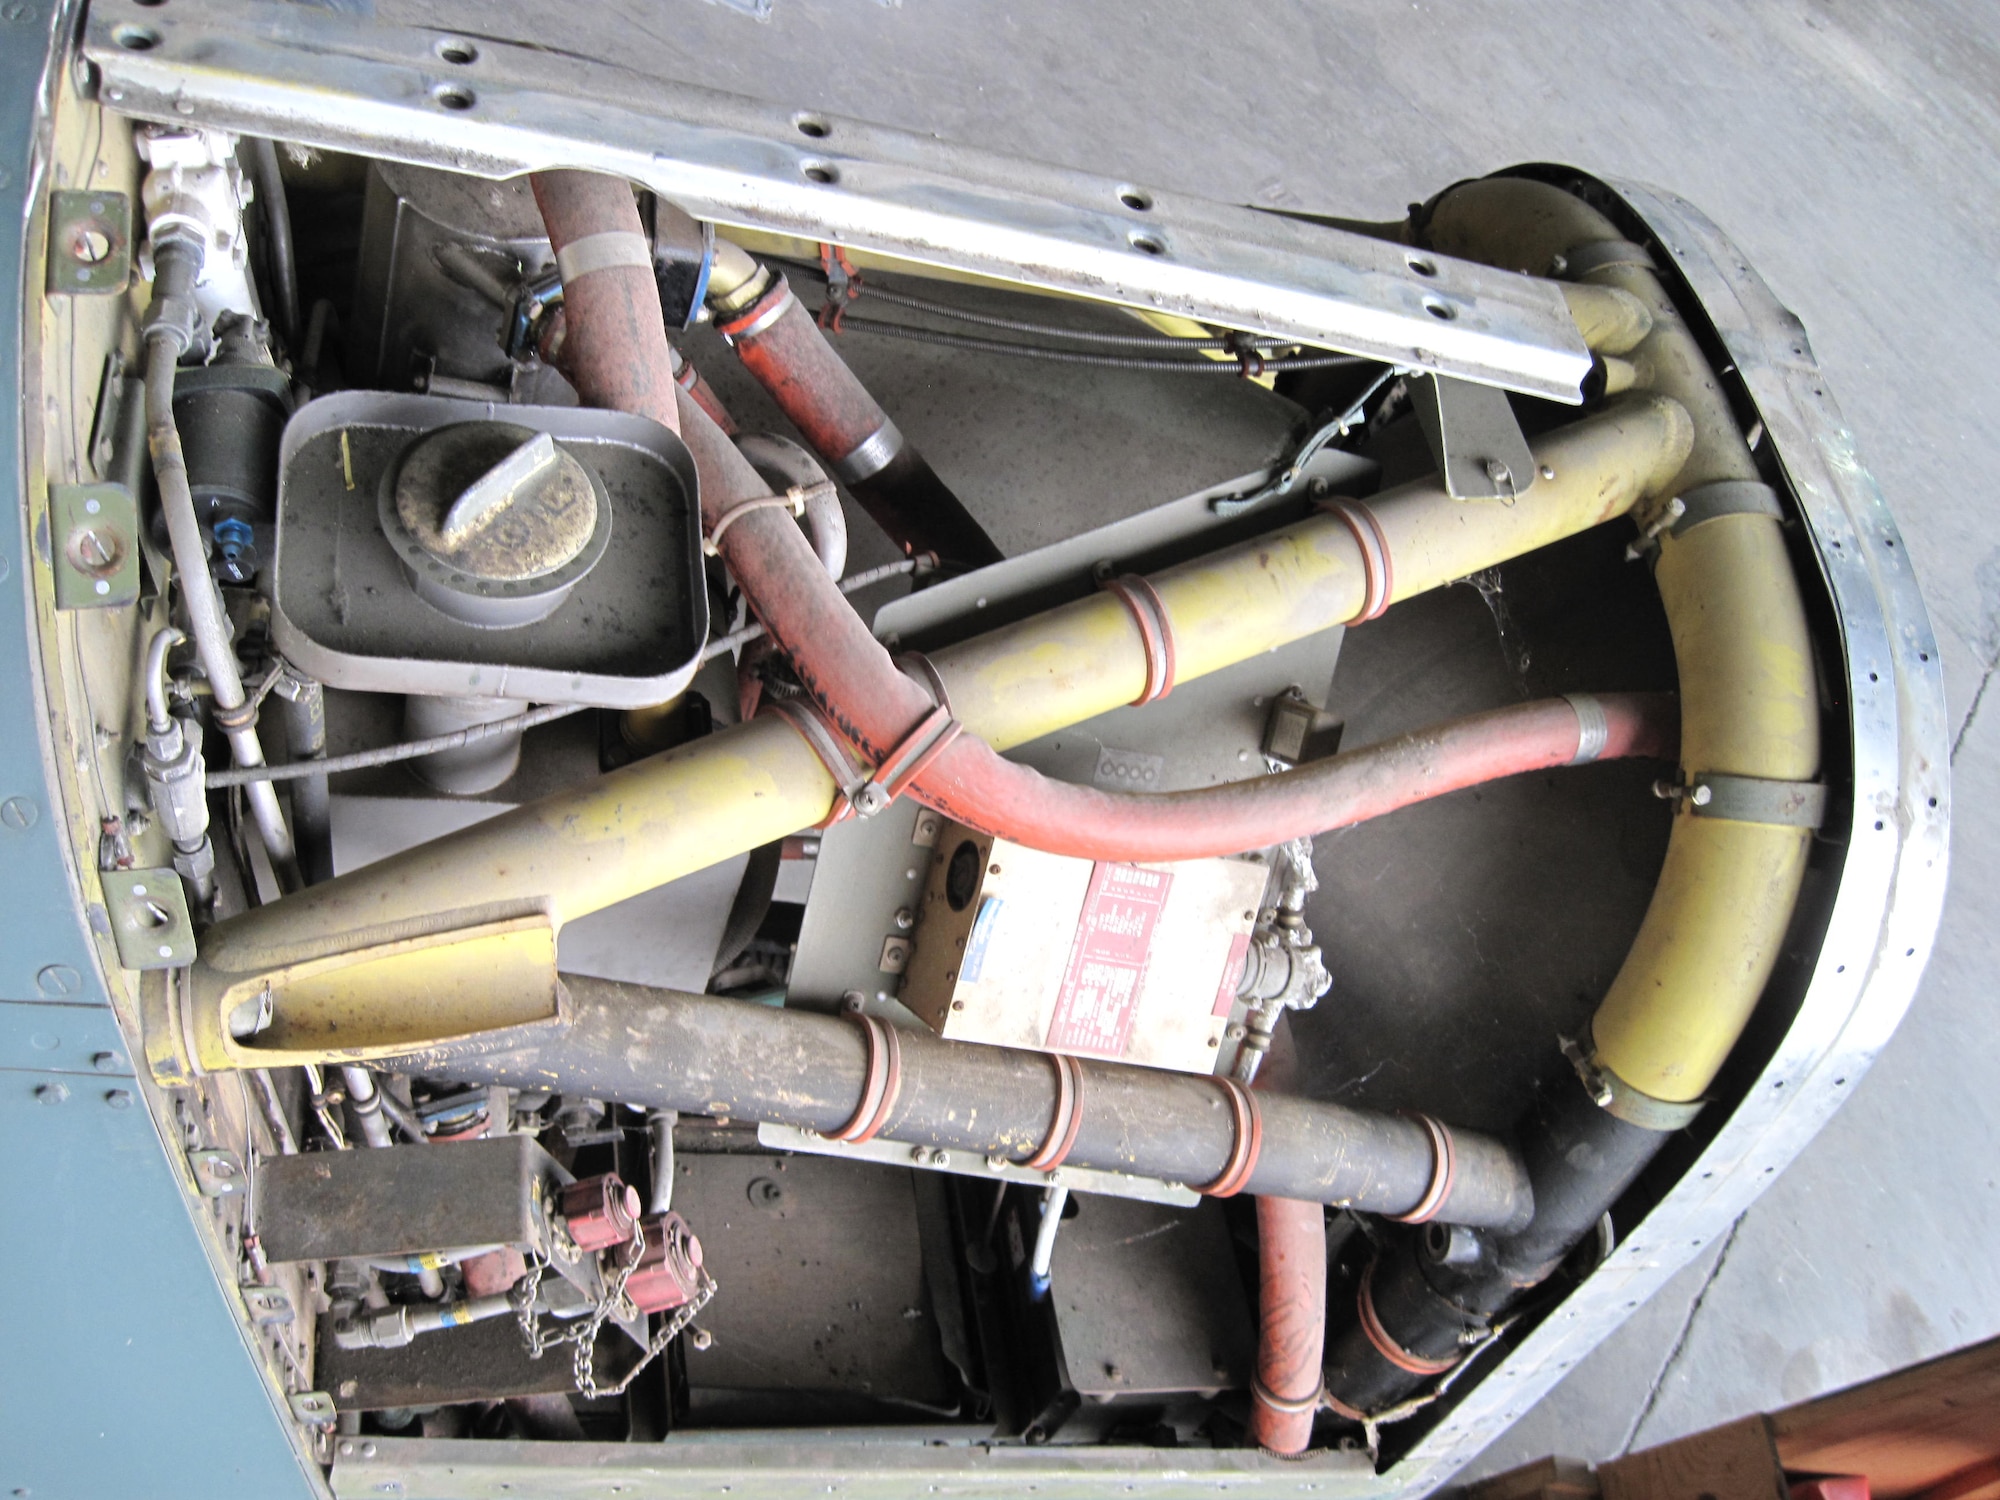 Picture of Piper PA-48E disassembled in storage hangar.